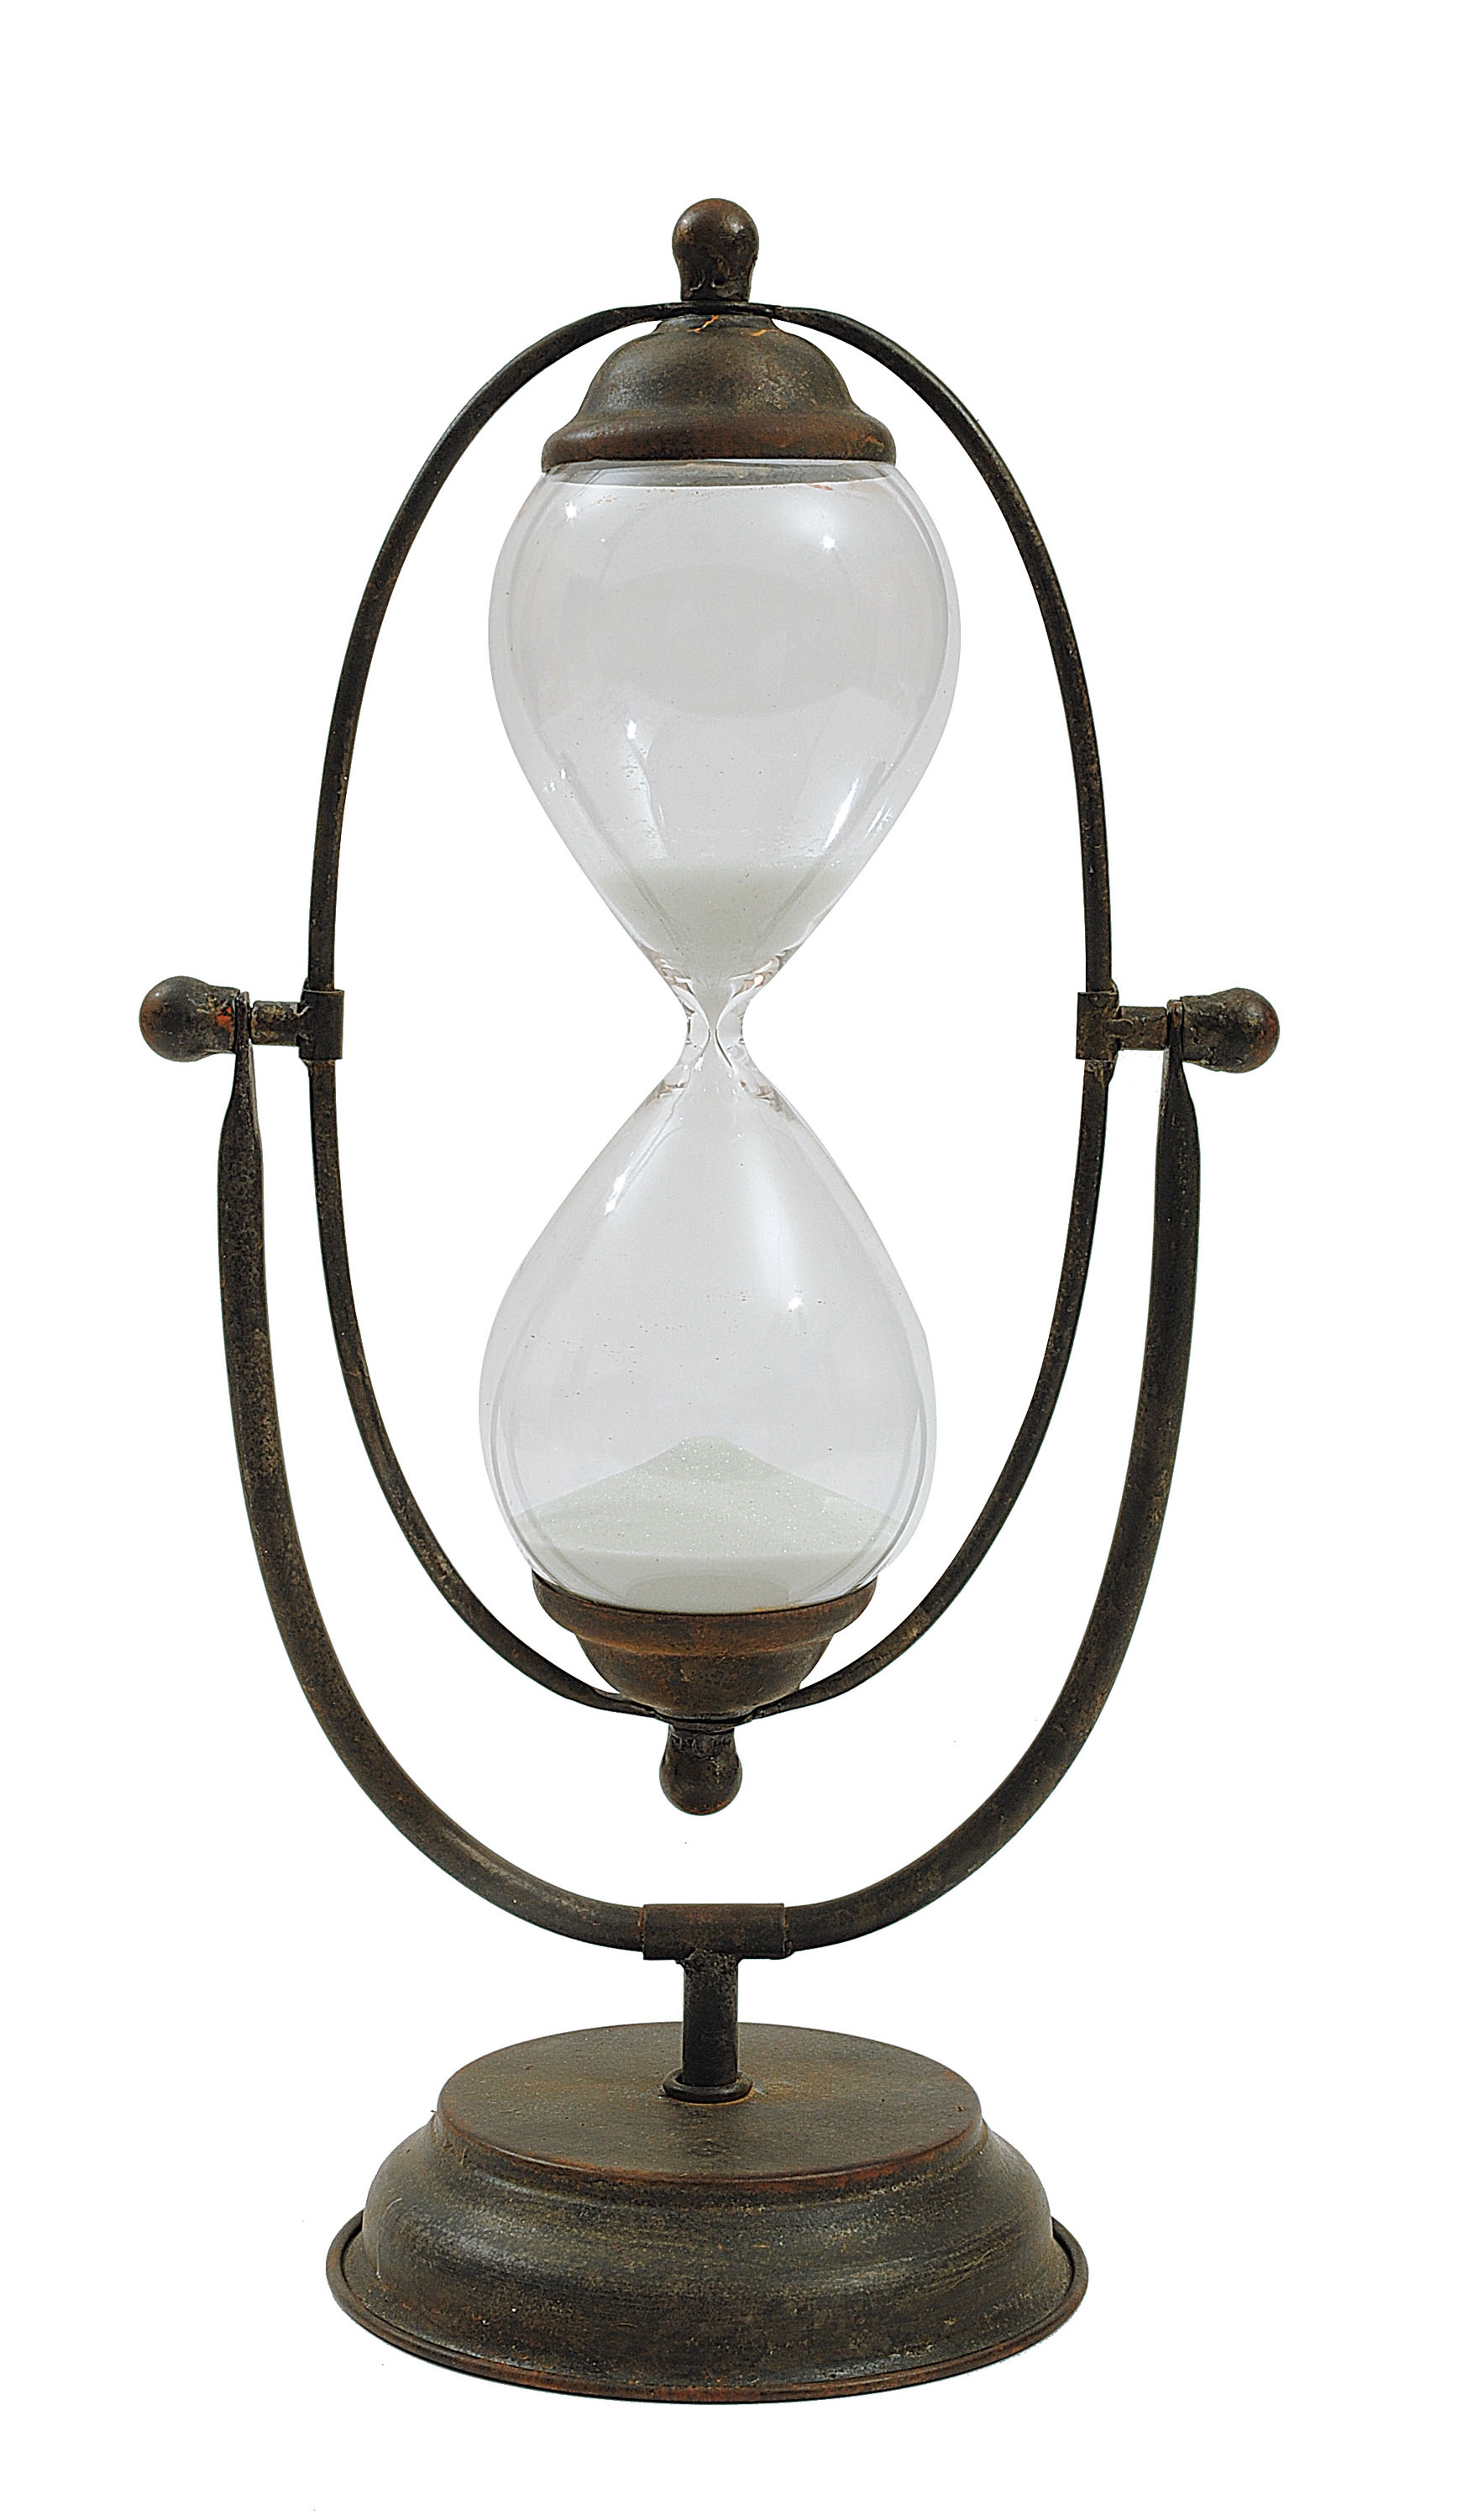 Decorative Metal Hourglass with White Sand, Rust - Image 1